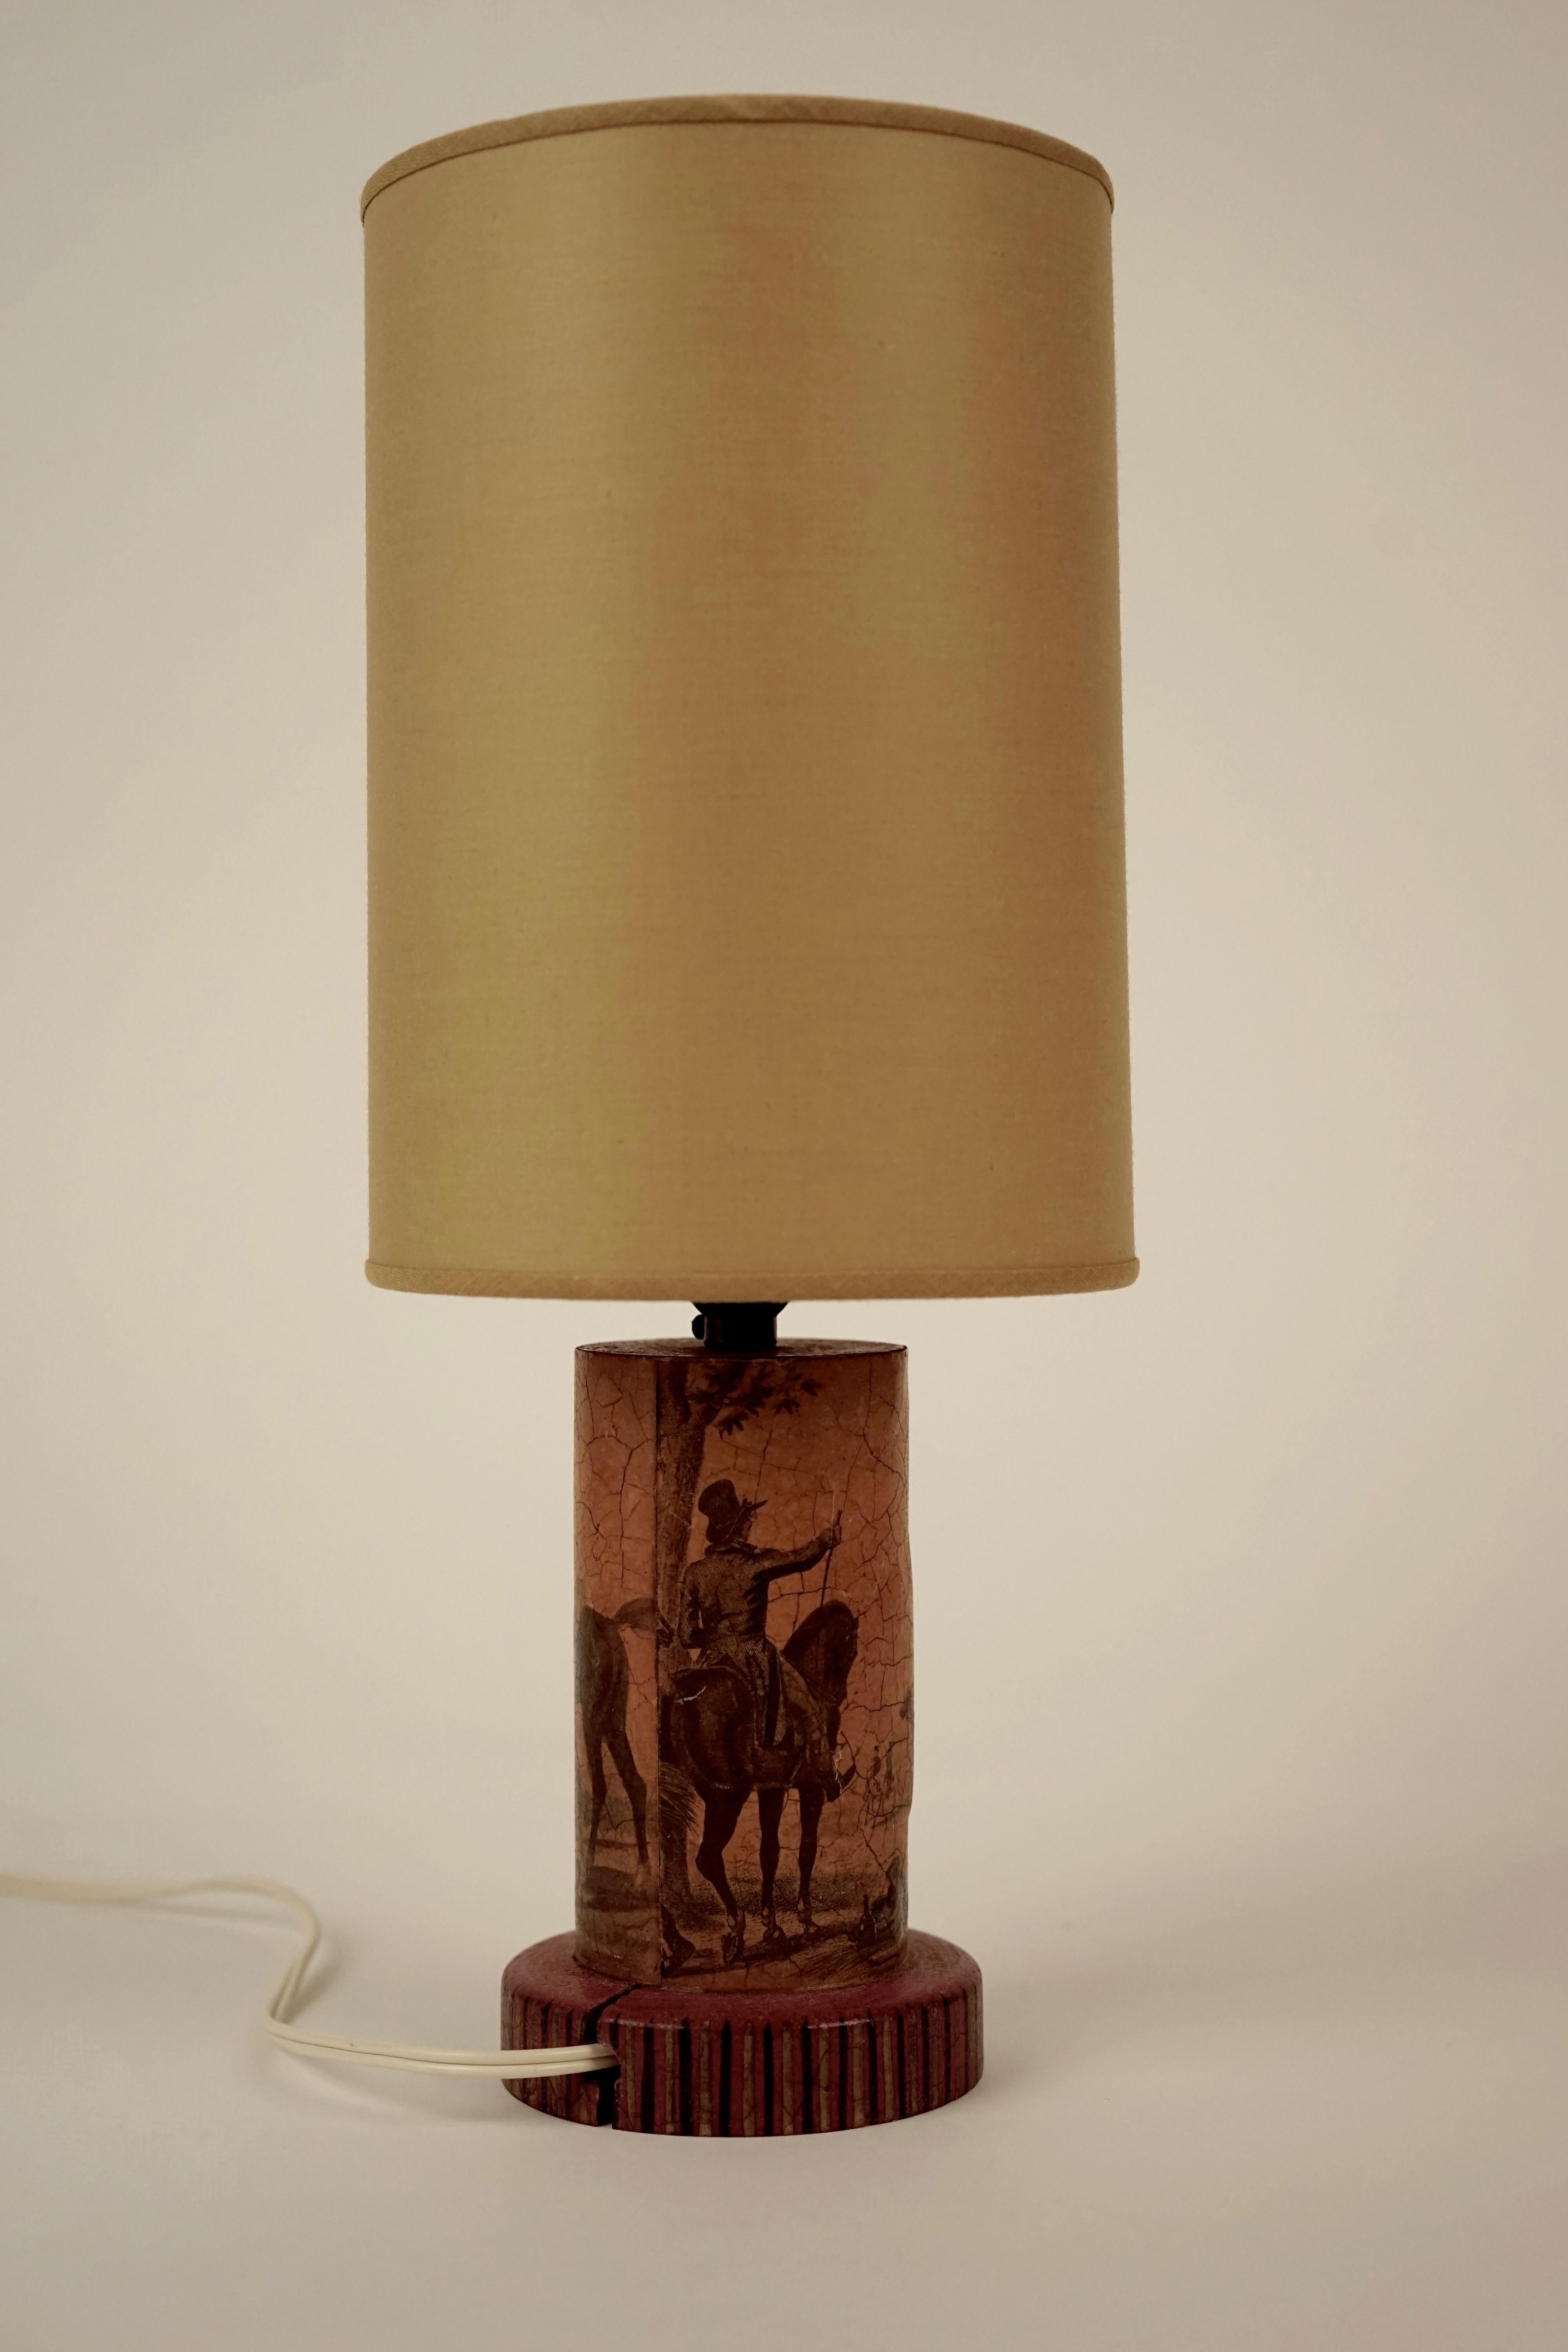 Small Découpage Table Lamp in Hollywood Regency Style In Distressed Condition For Sale In Vienna, Austria